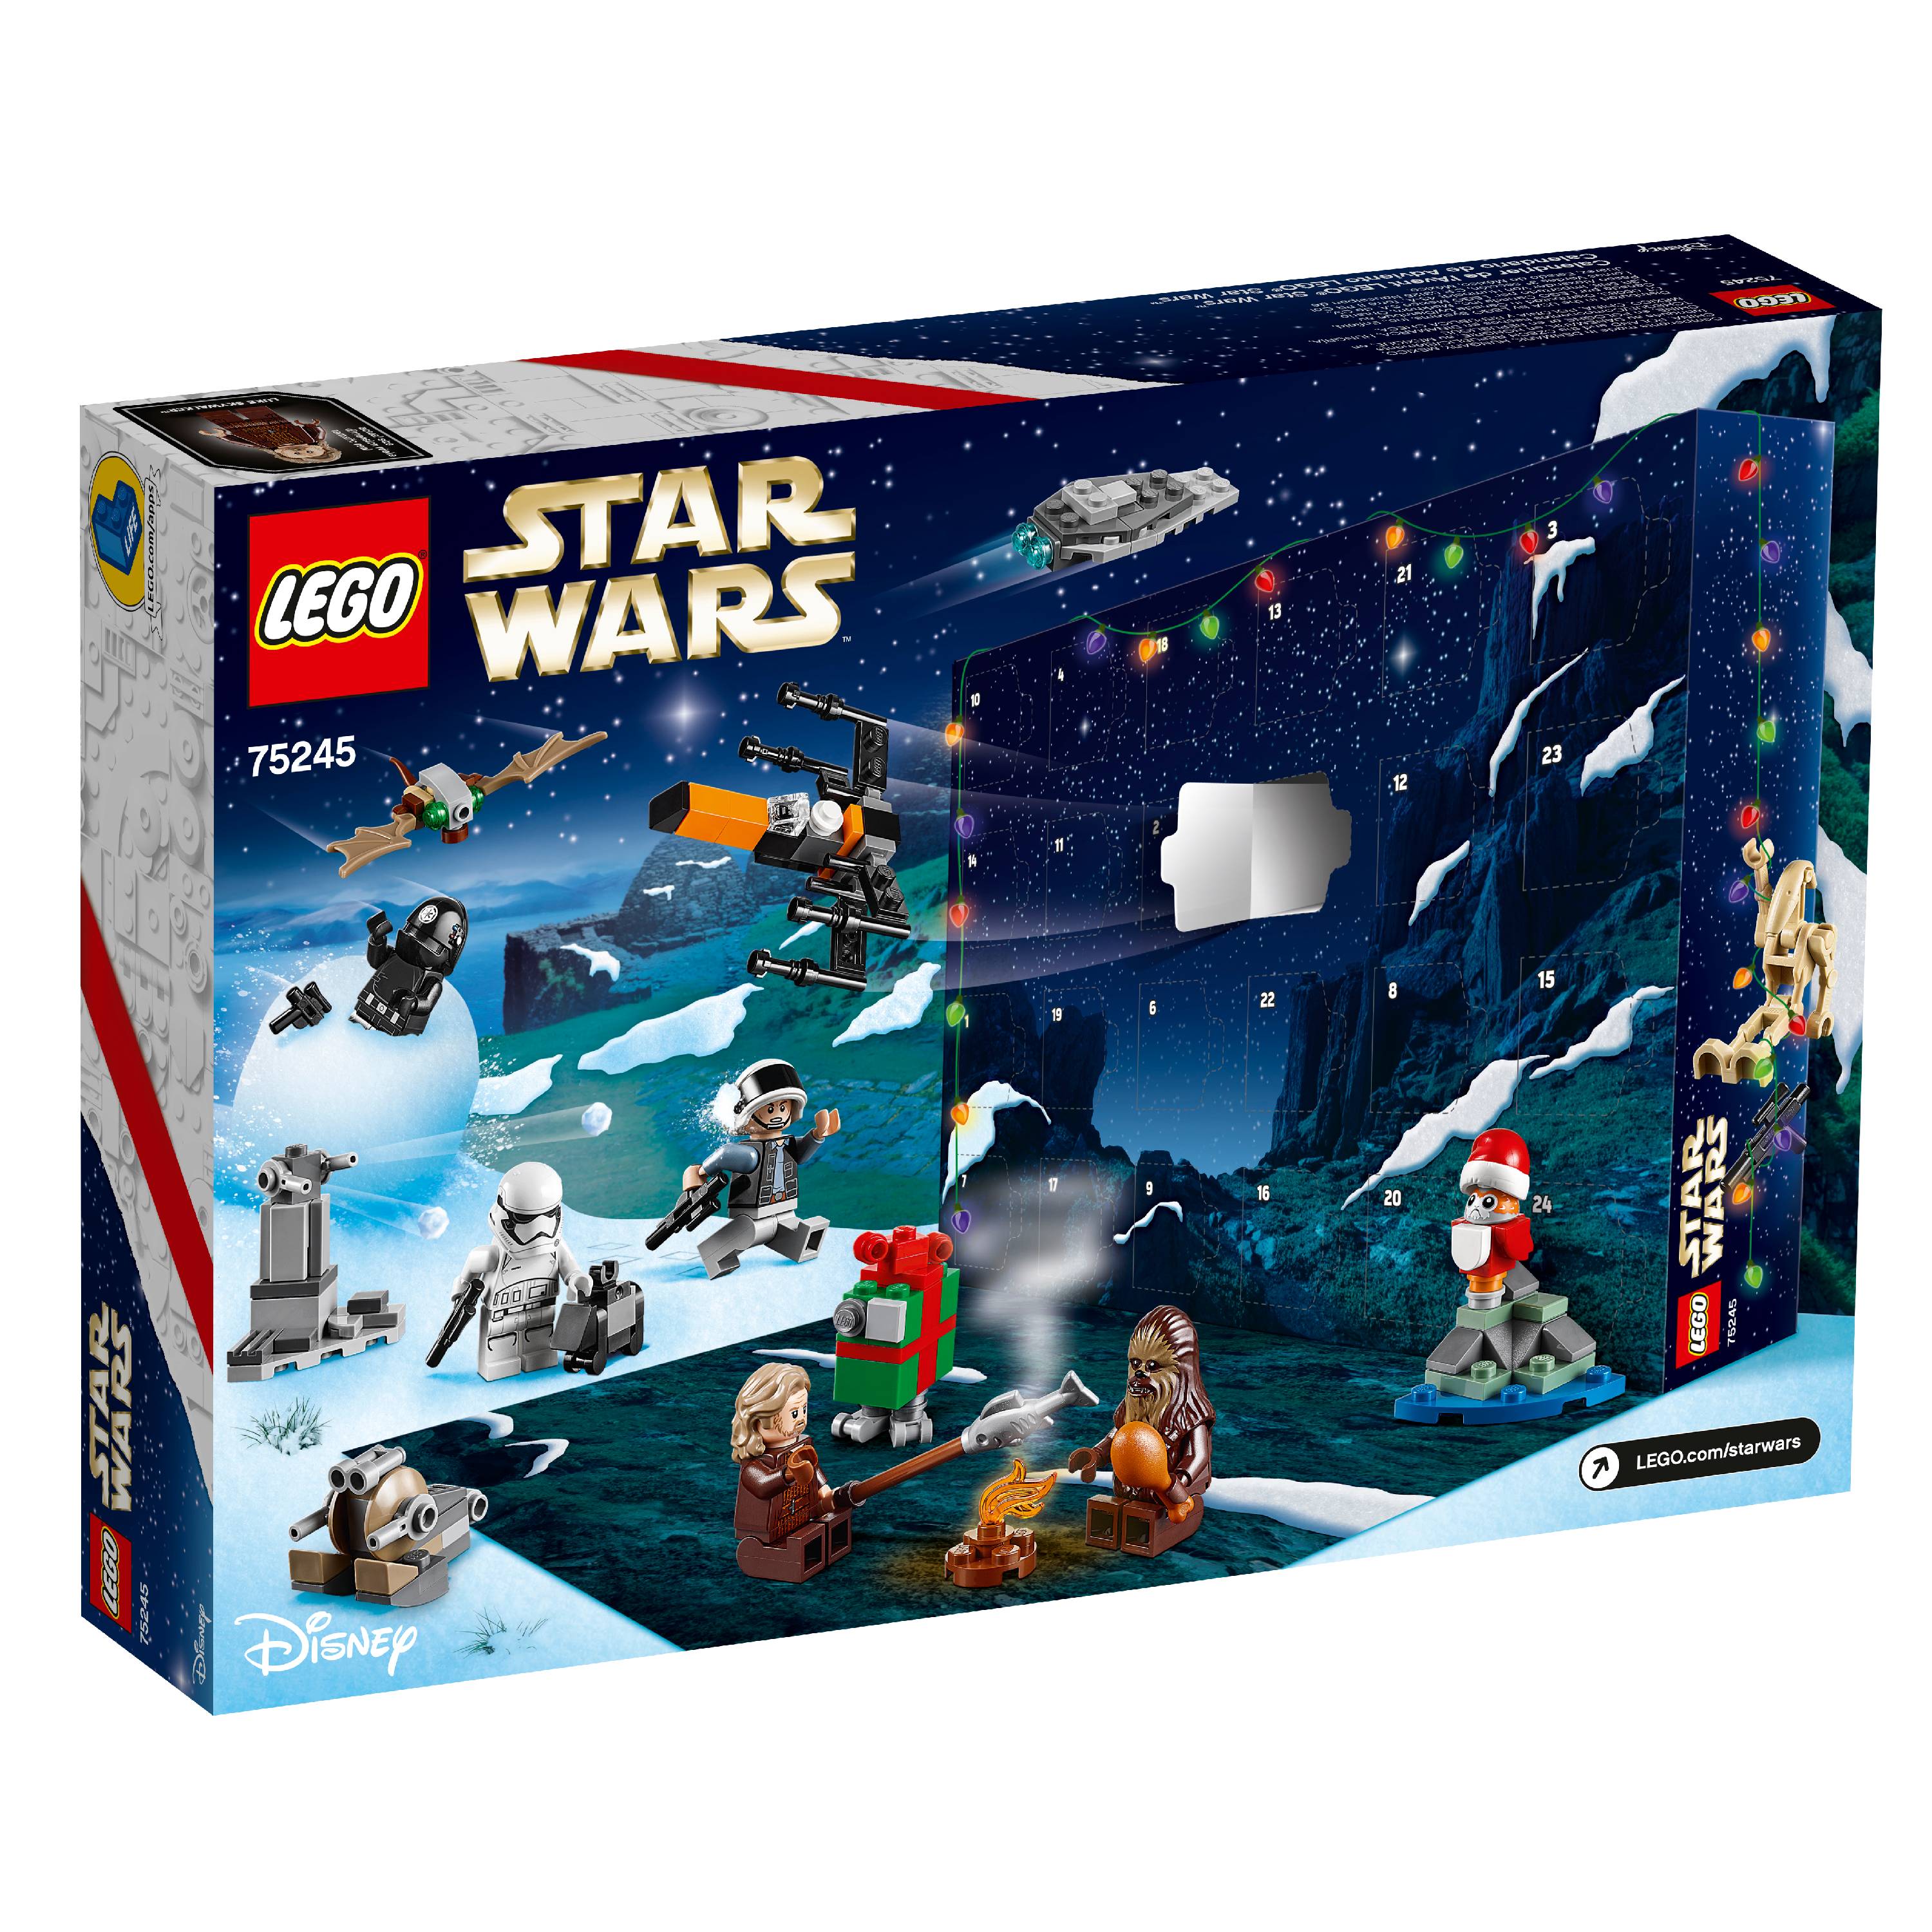 LEGO 75245 Star Wars Advent Calendar Building Kit (280 Pieces) - image 5 of 7